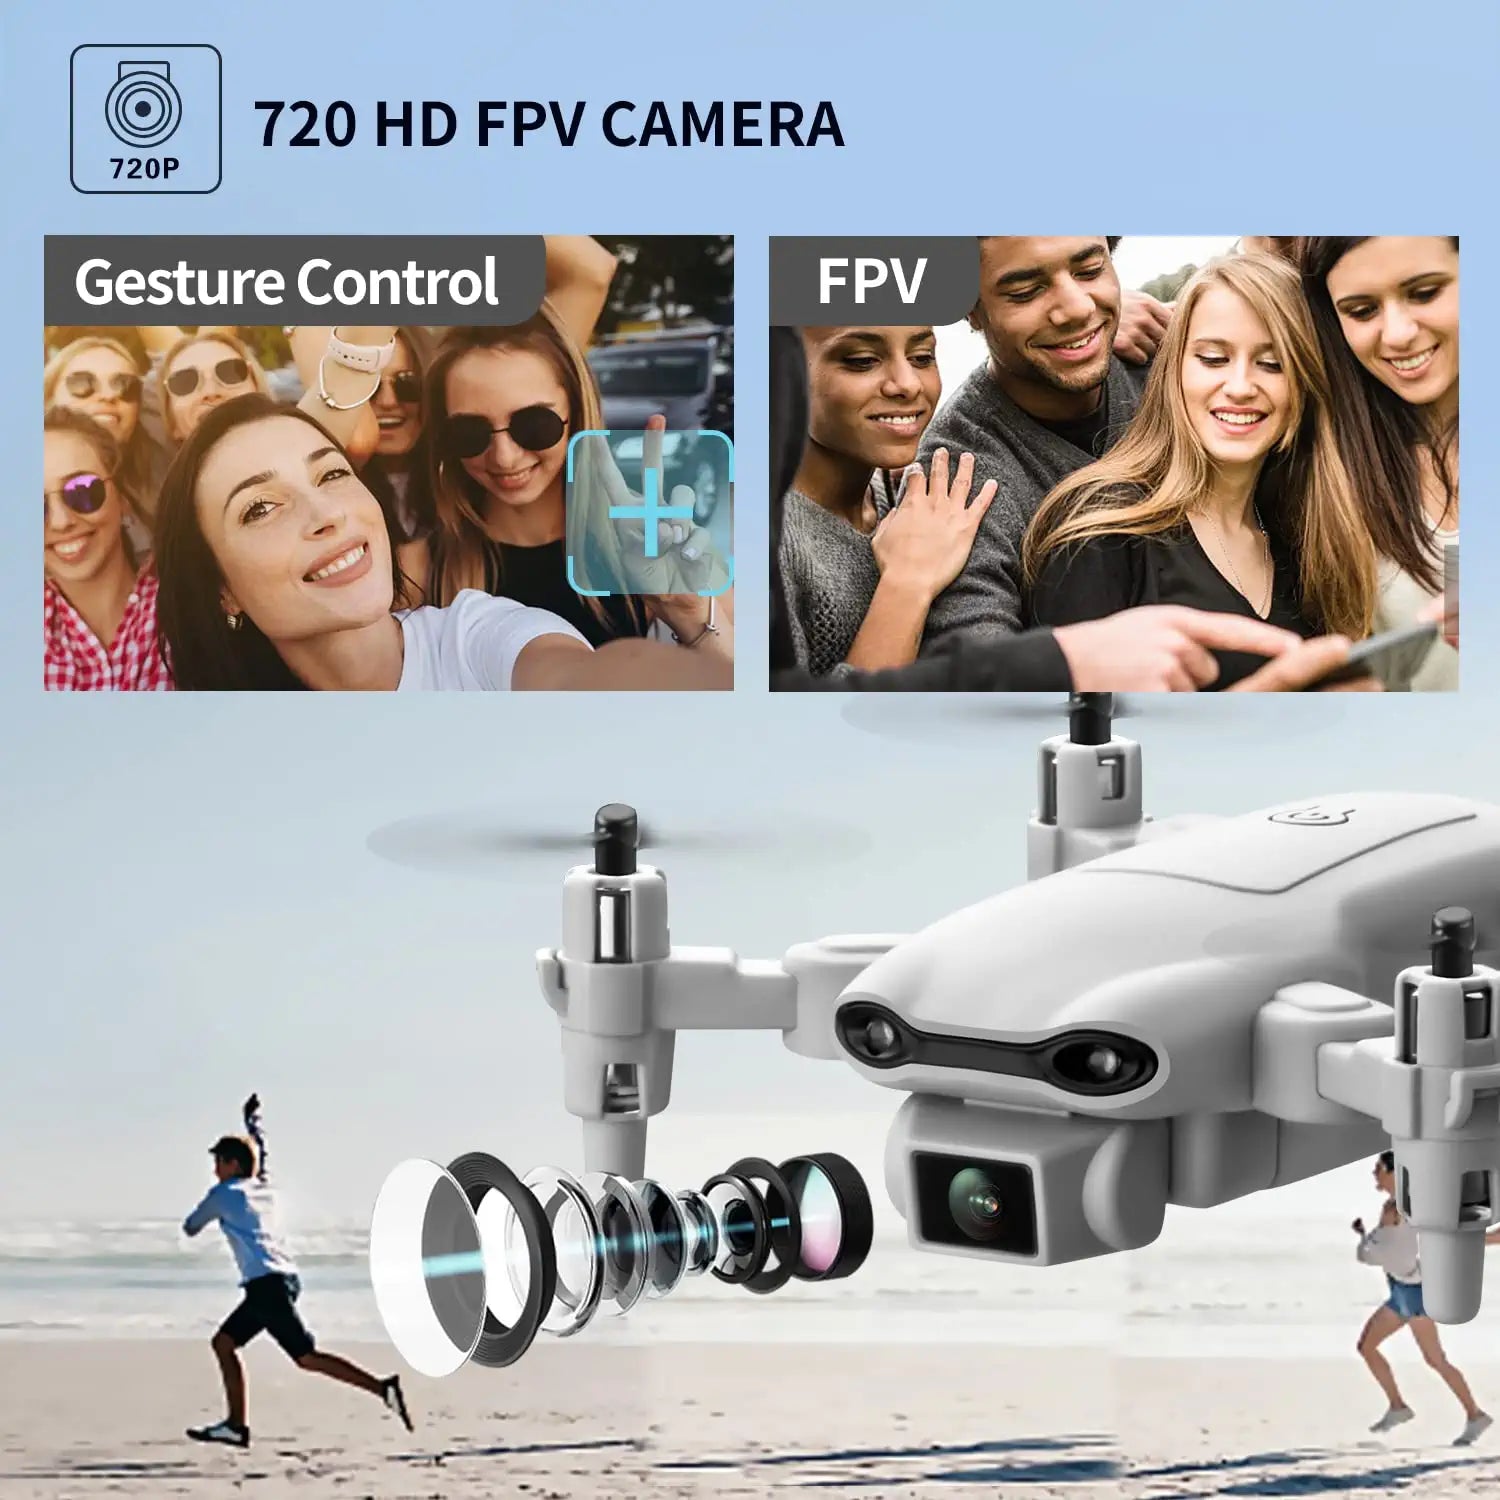 Drone with Camera for Kids Beginners Adults 1080P HD FPV Camera Remote  Control Helicopter Toys Gifts for Boys Girls Altitude Hold One Key Landing